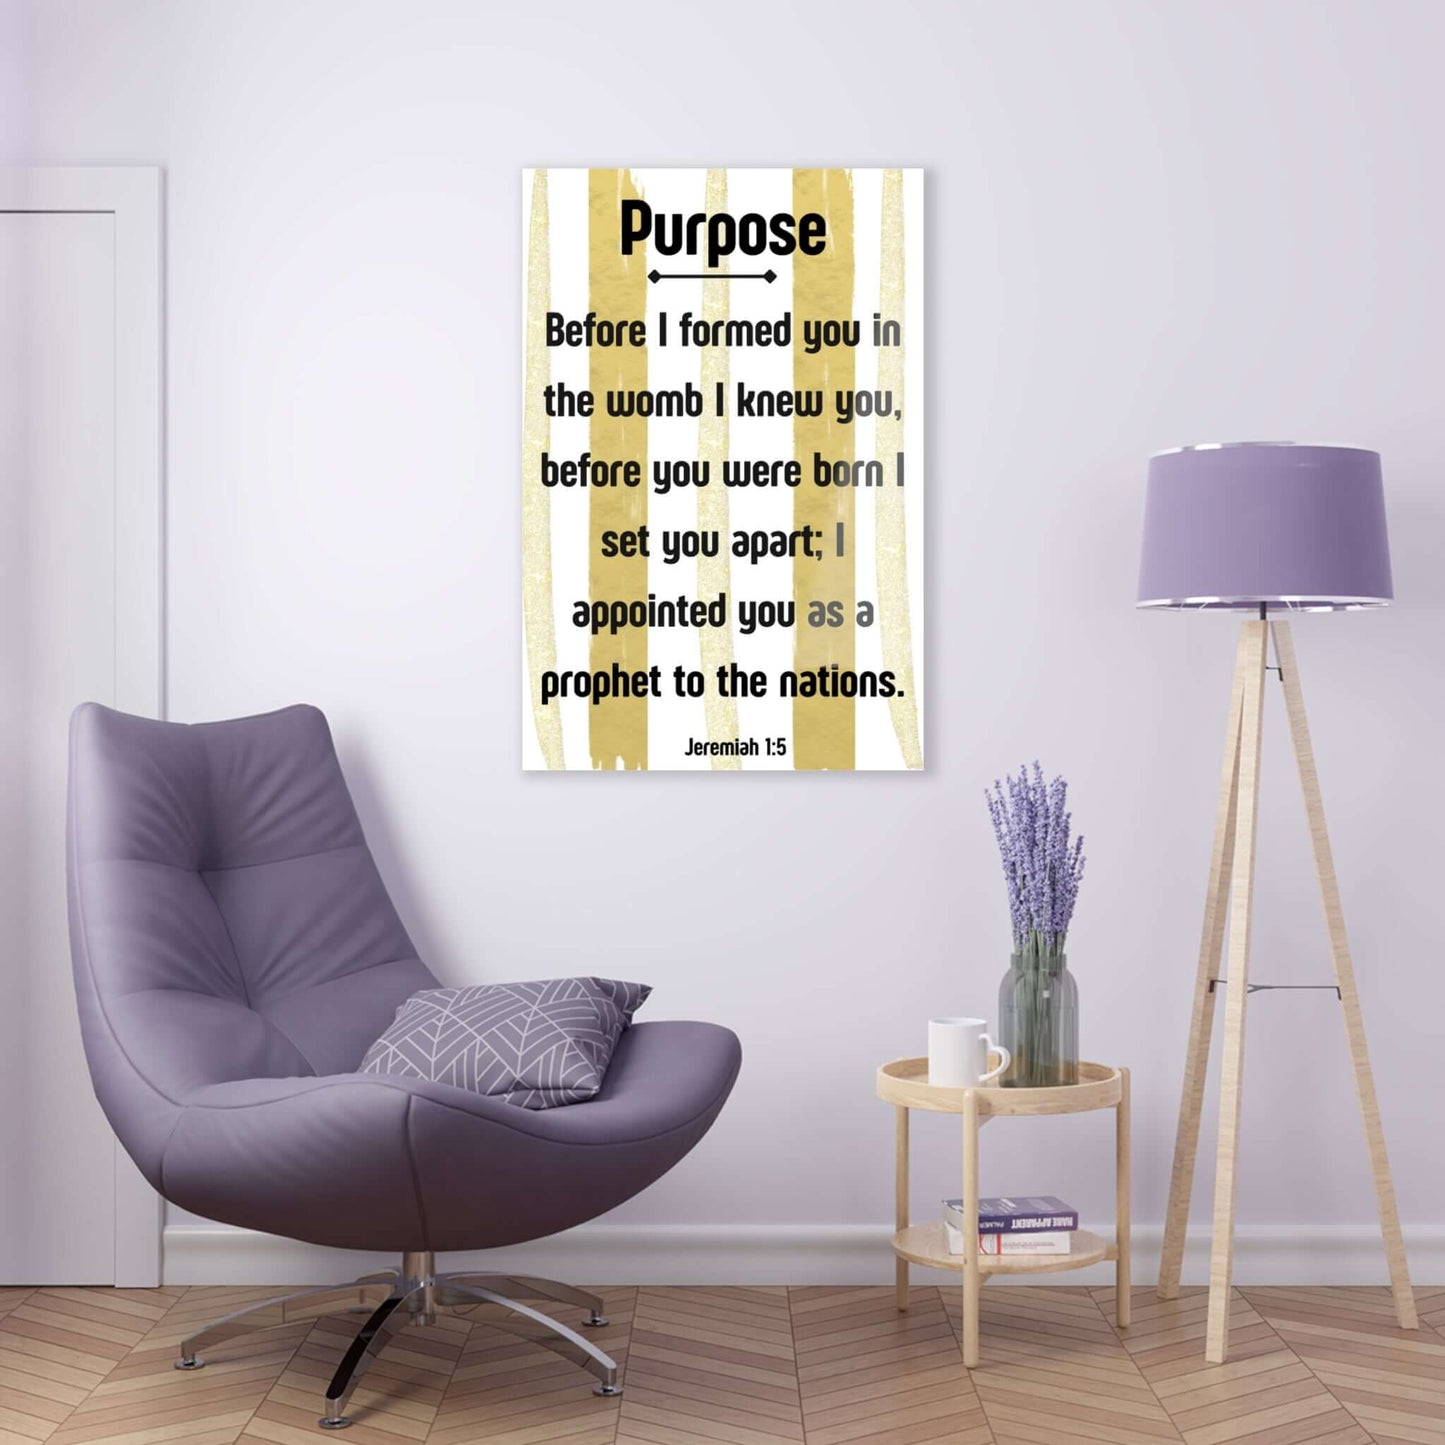 Tall Wall Art - Acrylic Print with Inspirational Scripture | Art & Wall Decor,Assembled in the USA,Assembled in USA,Decor,Home & Living,Home Decor,Indoor,Made in the USA,Made in USA,Poster